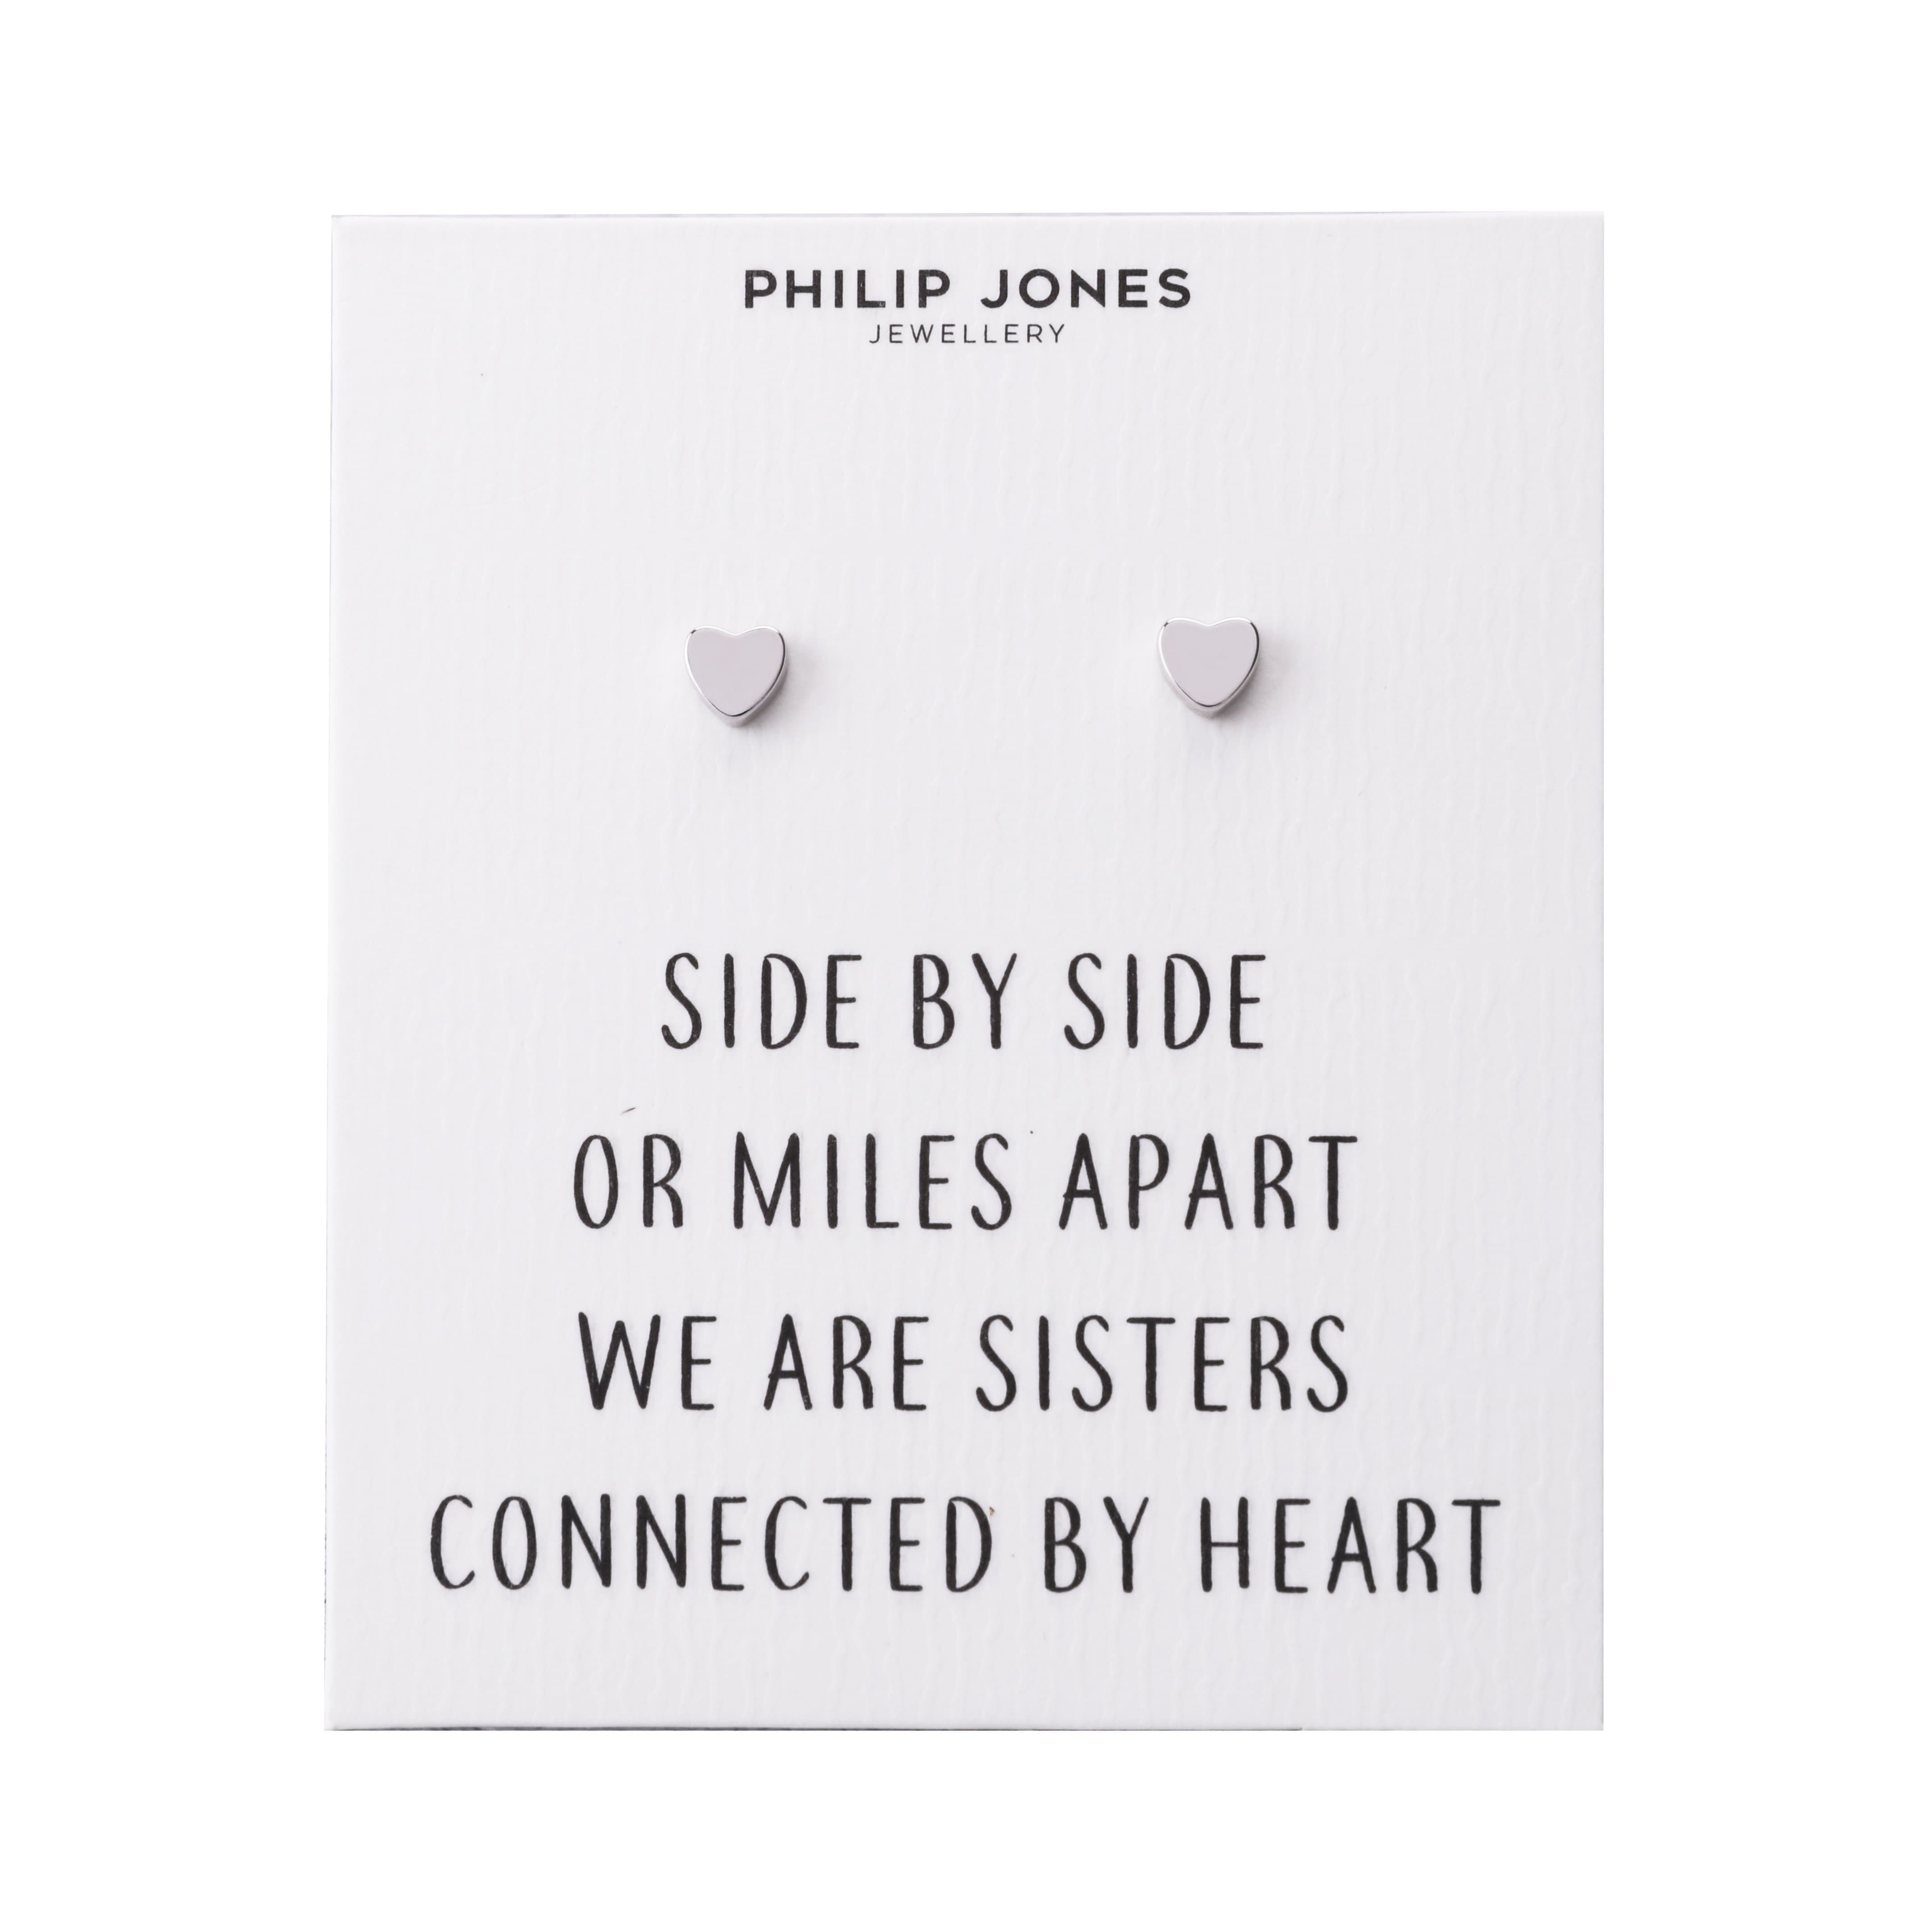 Silver Plated Sister Heart Stud Earrings with Quote Card